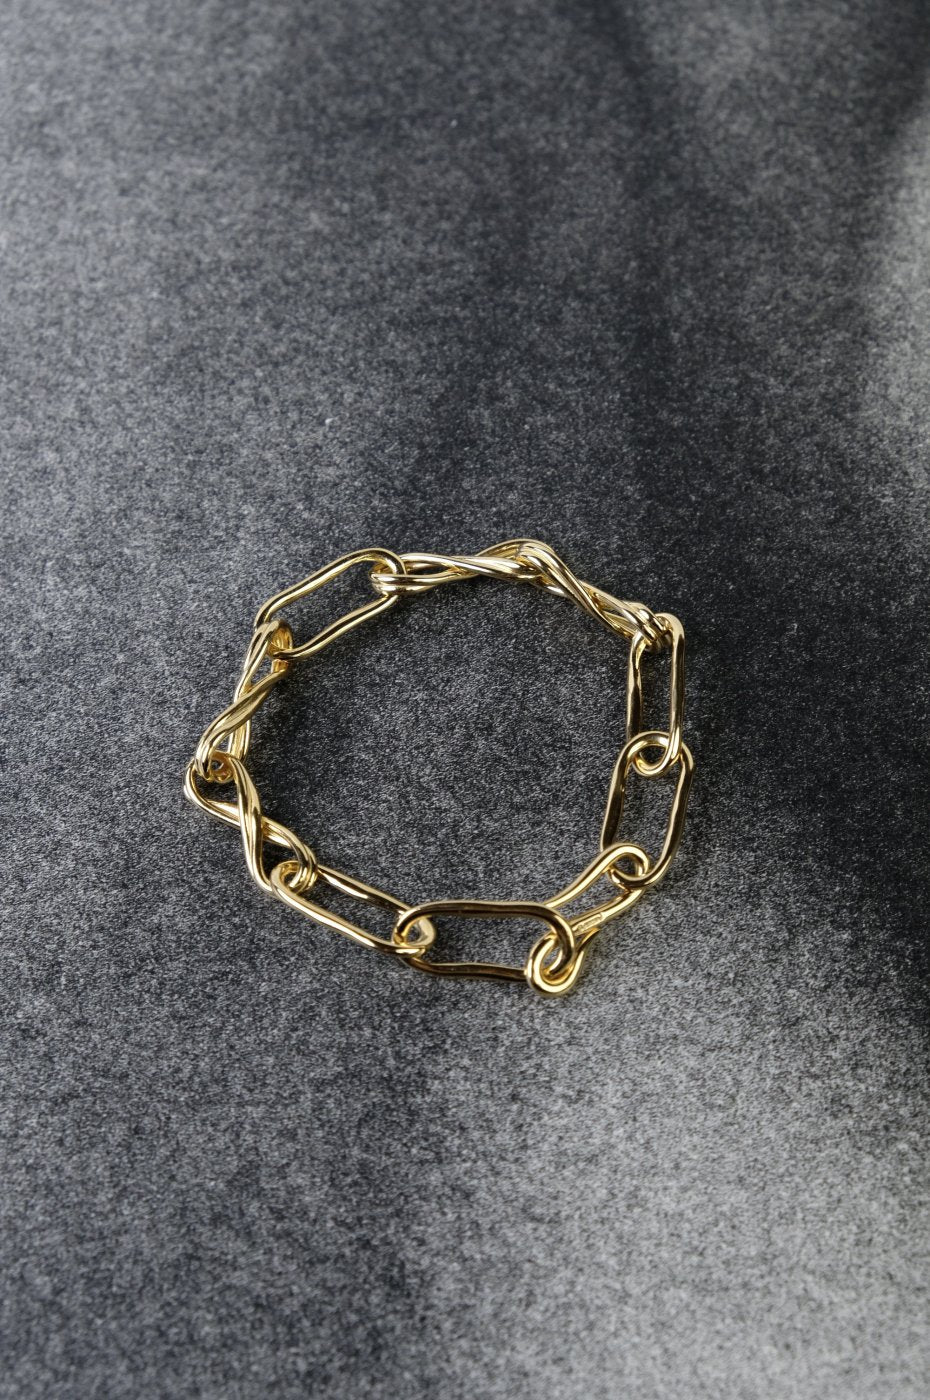 8mm Gold-Tone Stainless Steel Curb Chain Bracelet